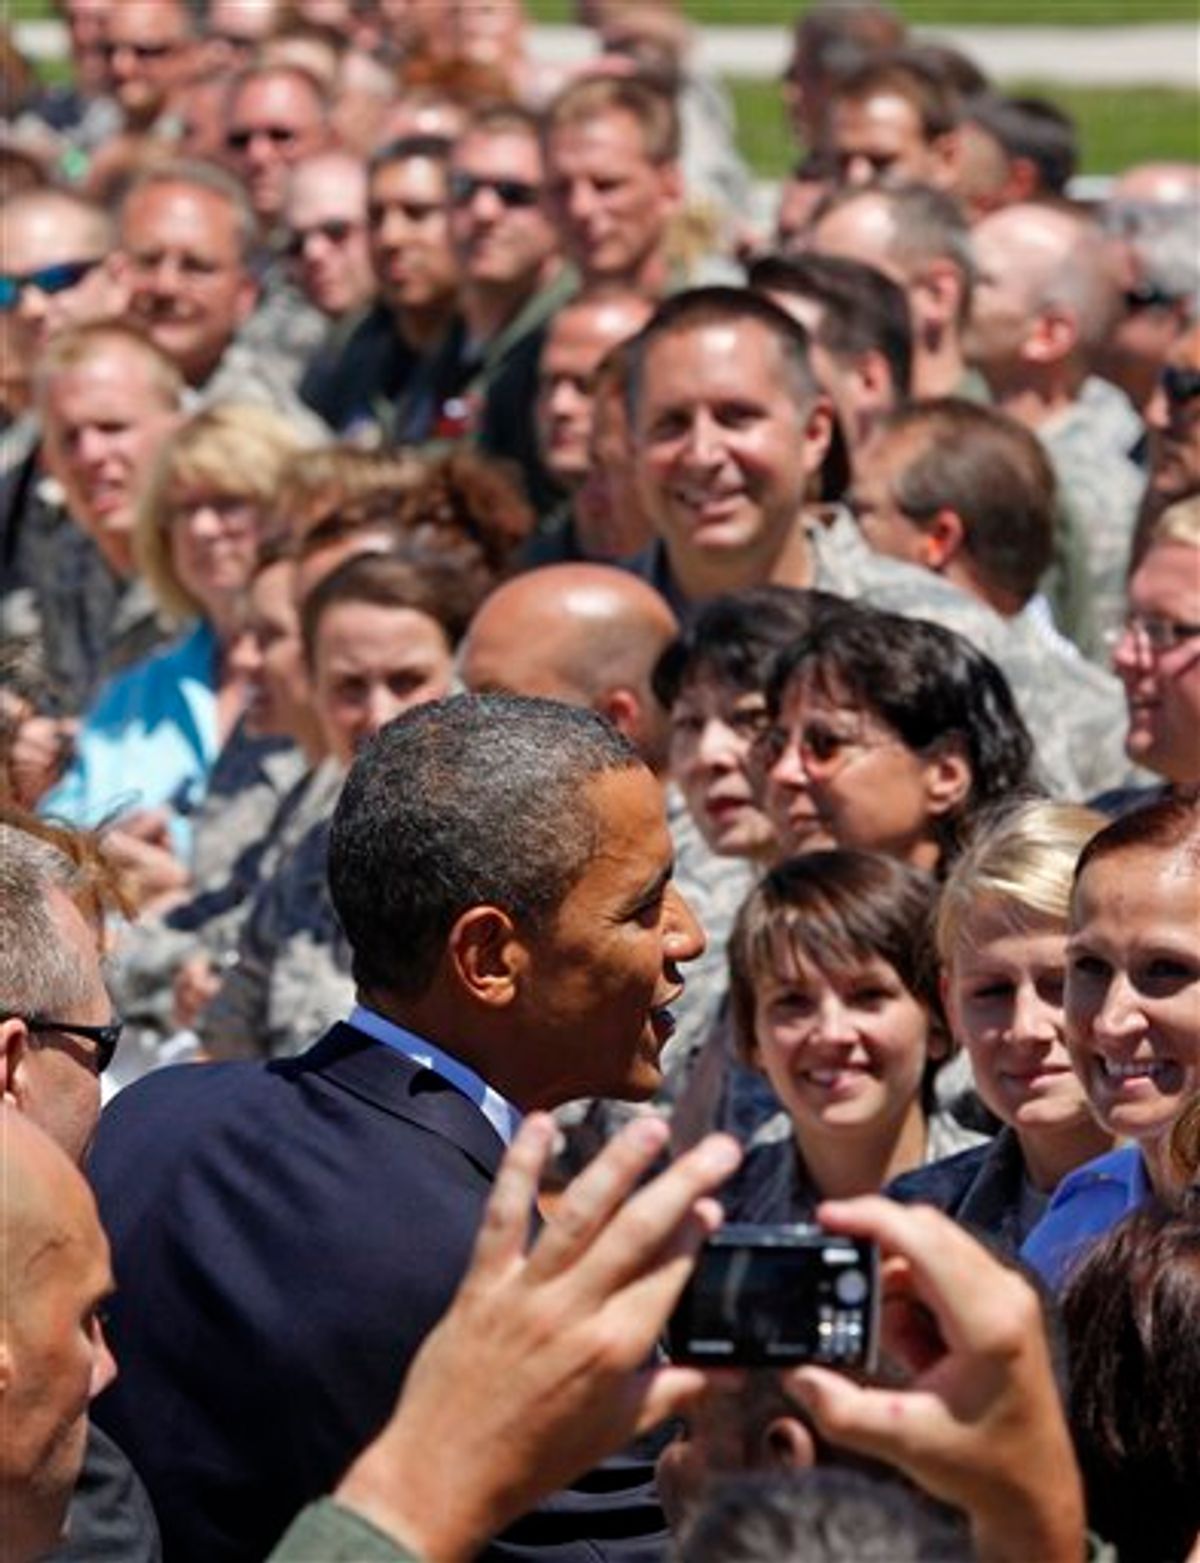 FILE - In this June 30, 2010 file photo, President Barack Obama greets members of the Wisconsin National Guards 128th Air Refueling Wing upon his arrival at Mitchell International airport in Milwaukee, Wis. When President Barack Obama makes his third Wisconsin visit in a little over two months Monday, he will get a chance to shore up his base at a Labor Day rally in a state where his approval ratings are dipping and fellow Democrats face tough re-election bids.  (AP Photo/Jeffrey Phelps, File) (AP)